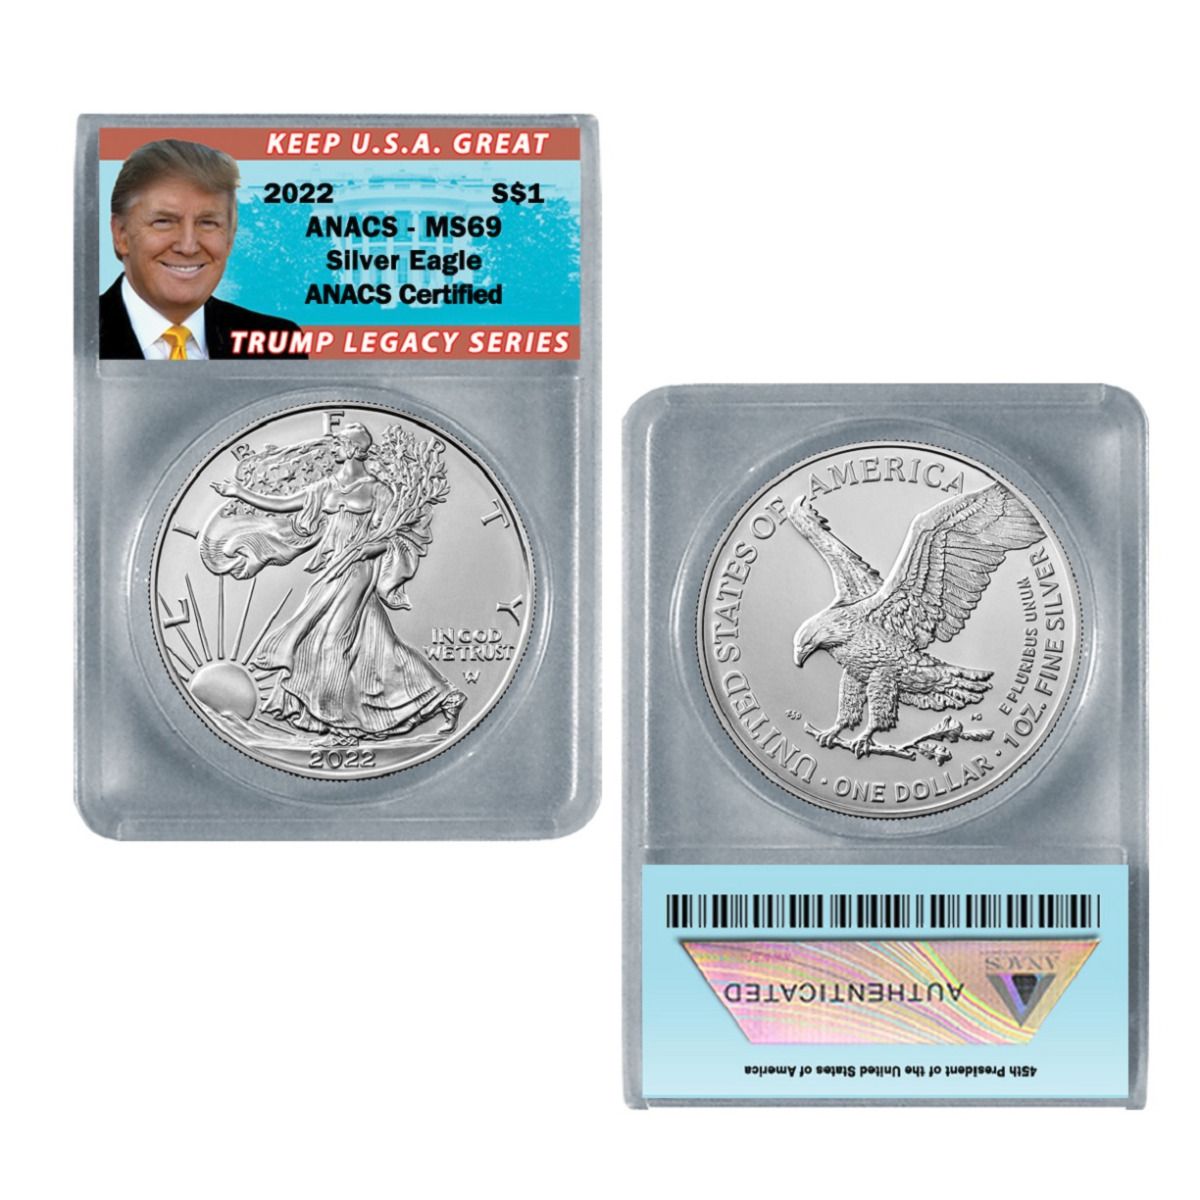 4 DONALD TRUMP 2017 AMERICAN SILVER EAGLES ALL PCGS MS69 FIRST STRIKE 1oz Coins 